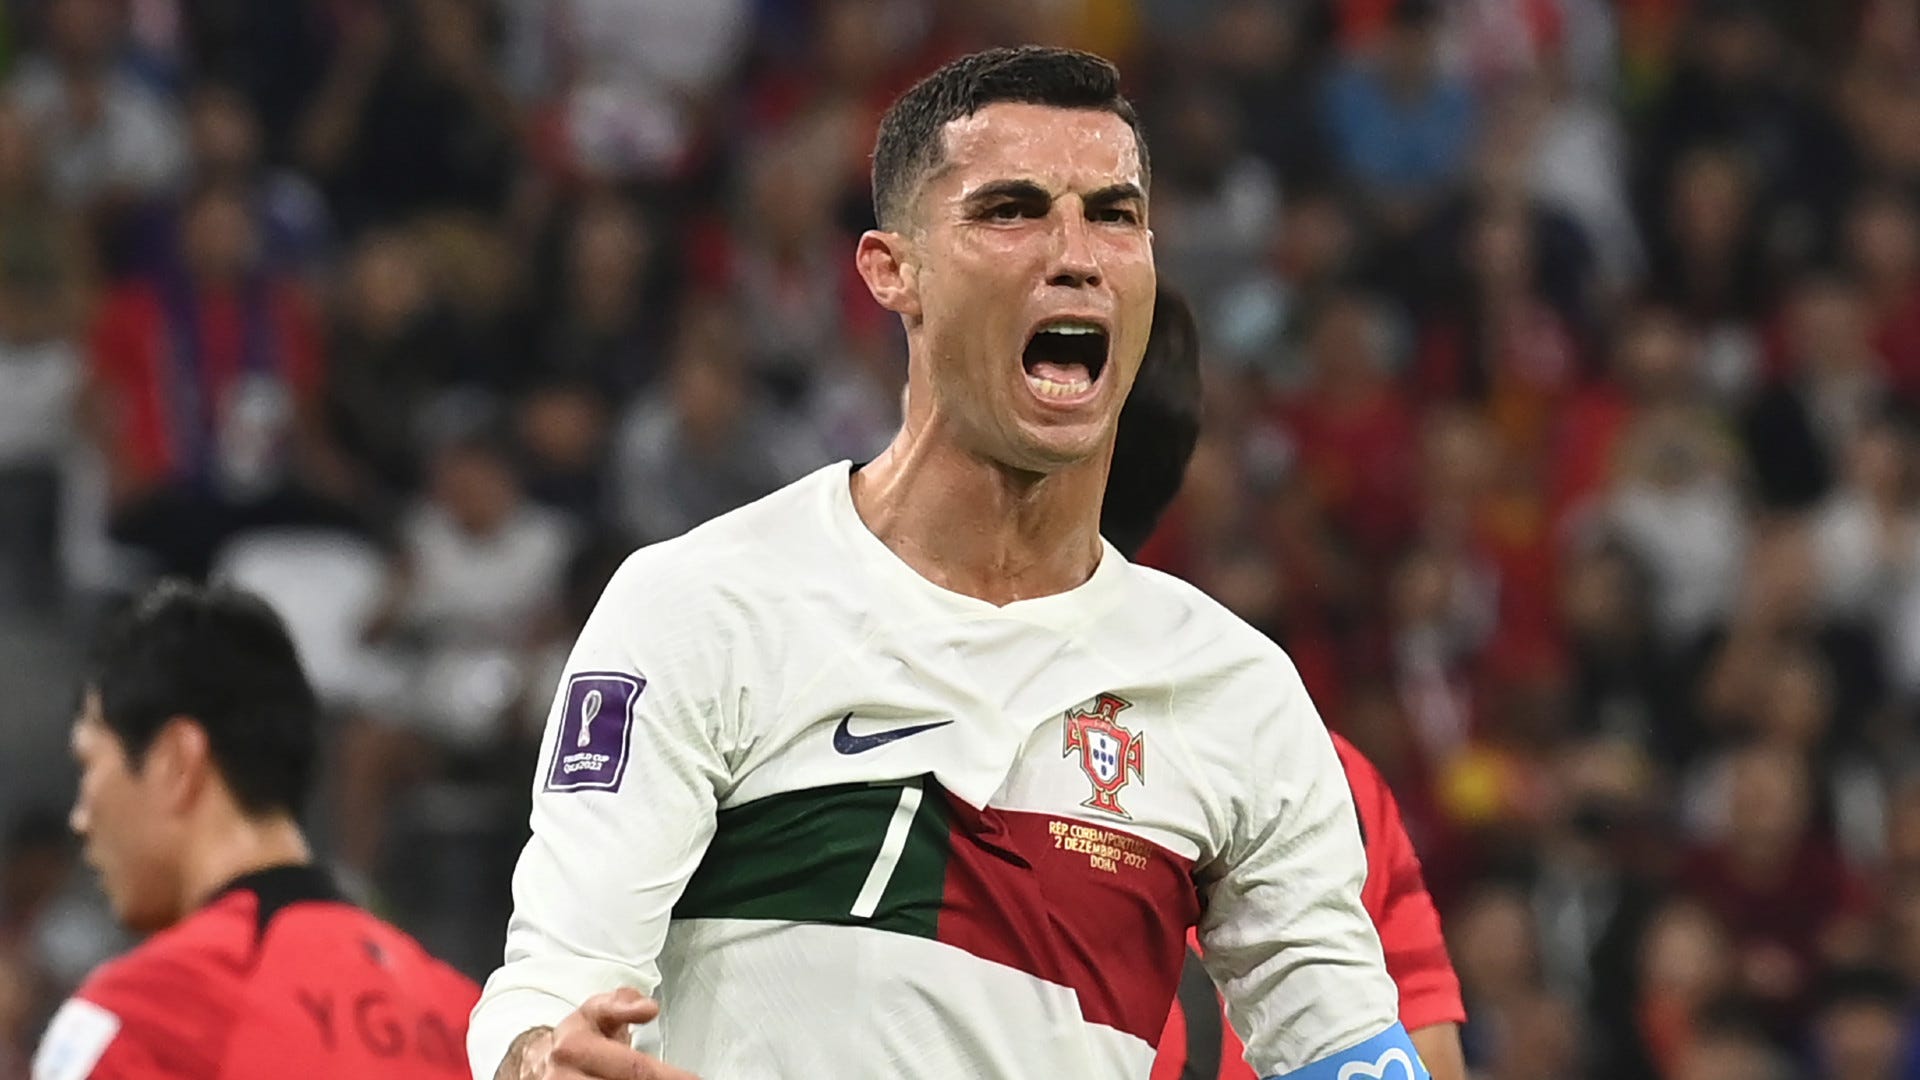 Portuguese newspaper readers vote overwhelmingly for Cristiano Ronaldo to be benched in World Cup | Goal.com India